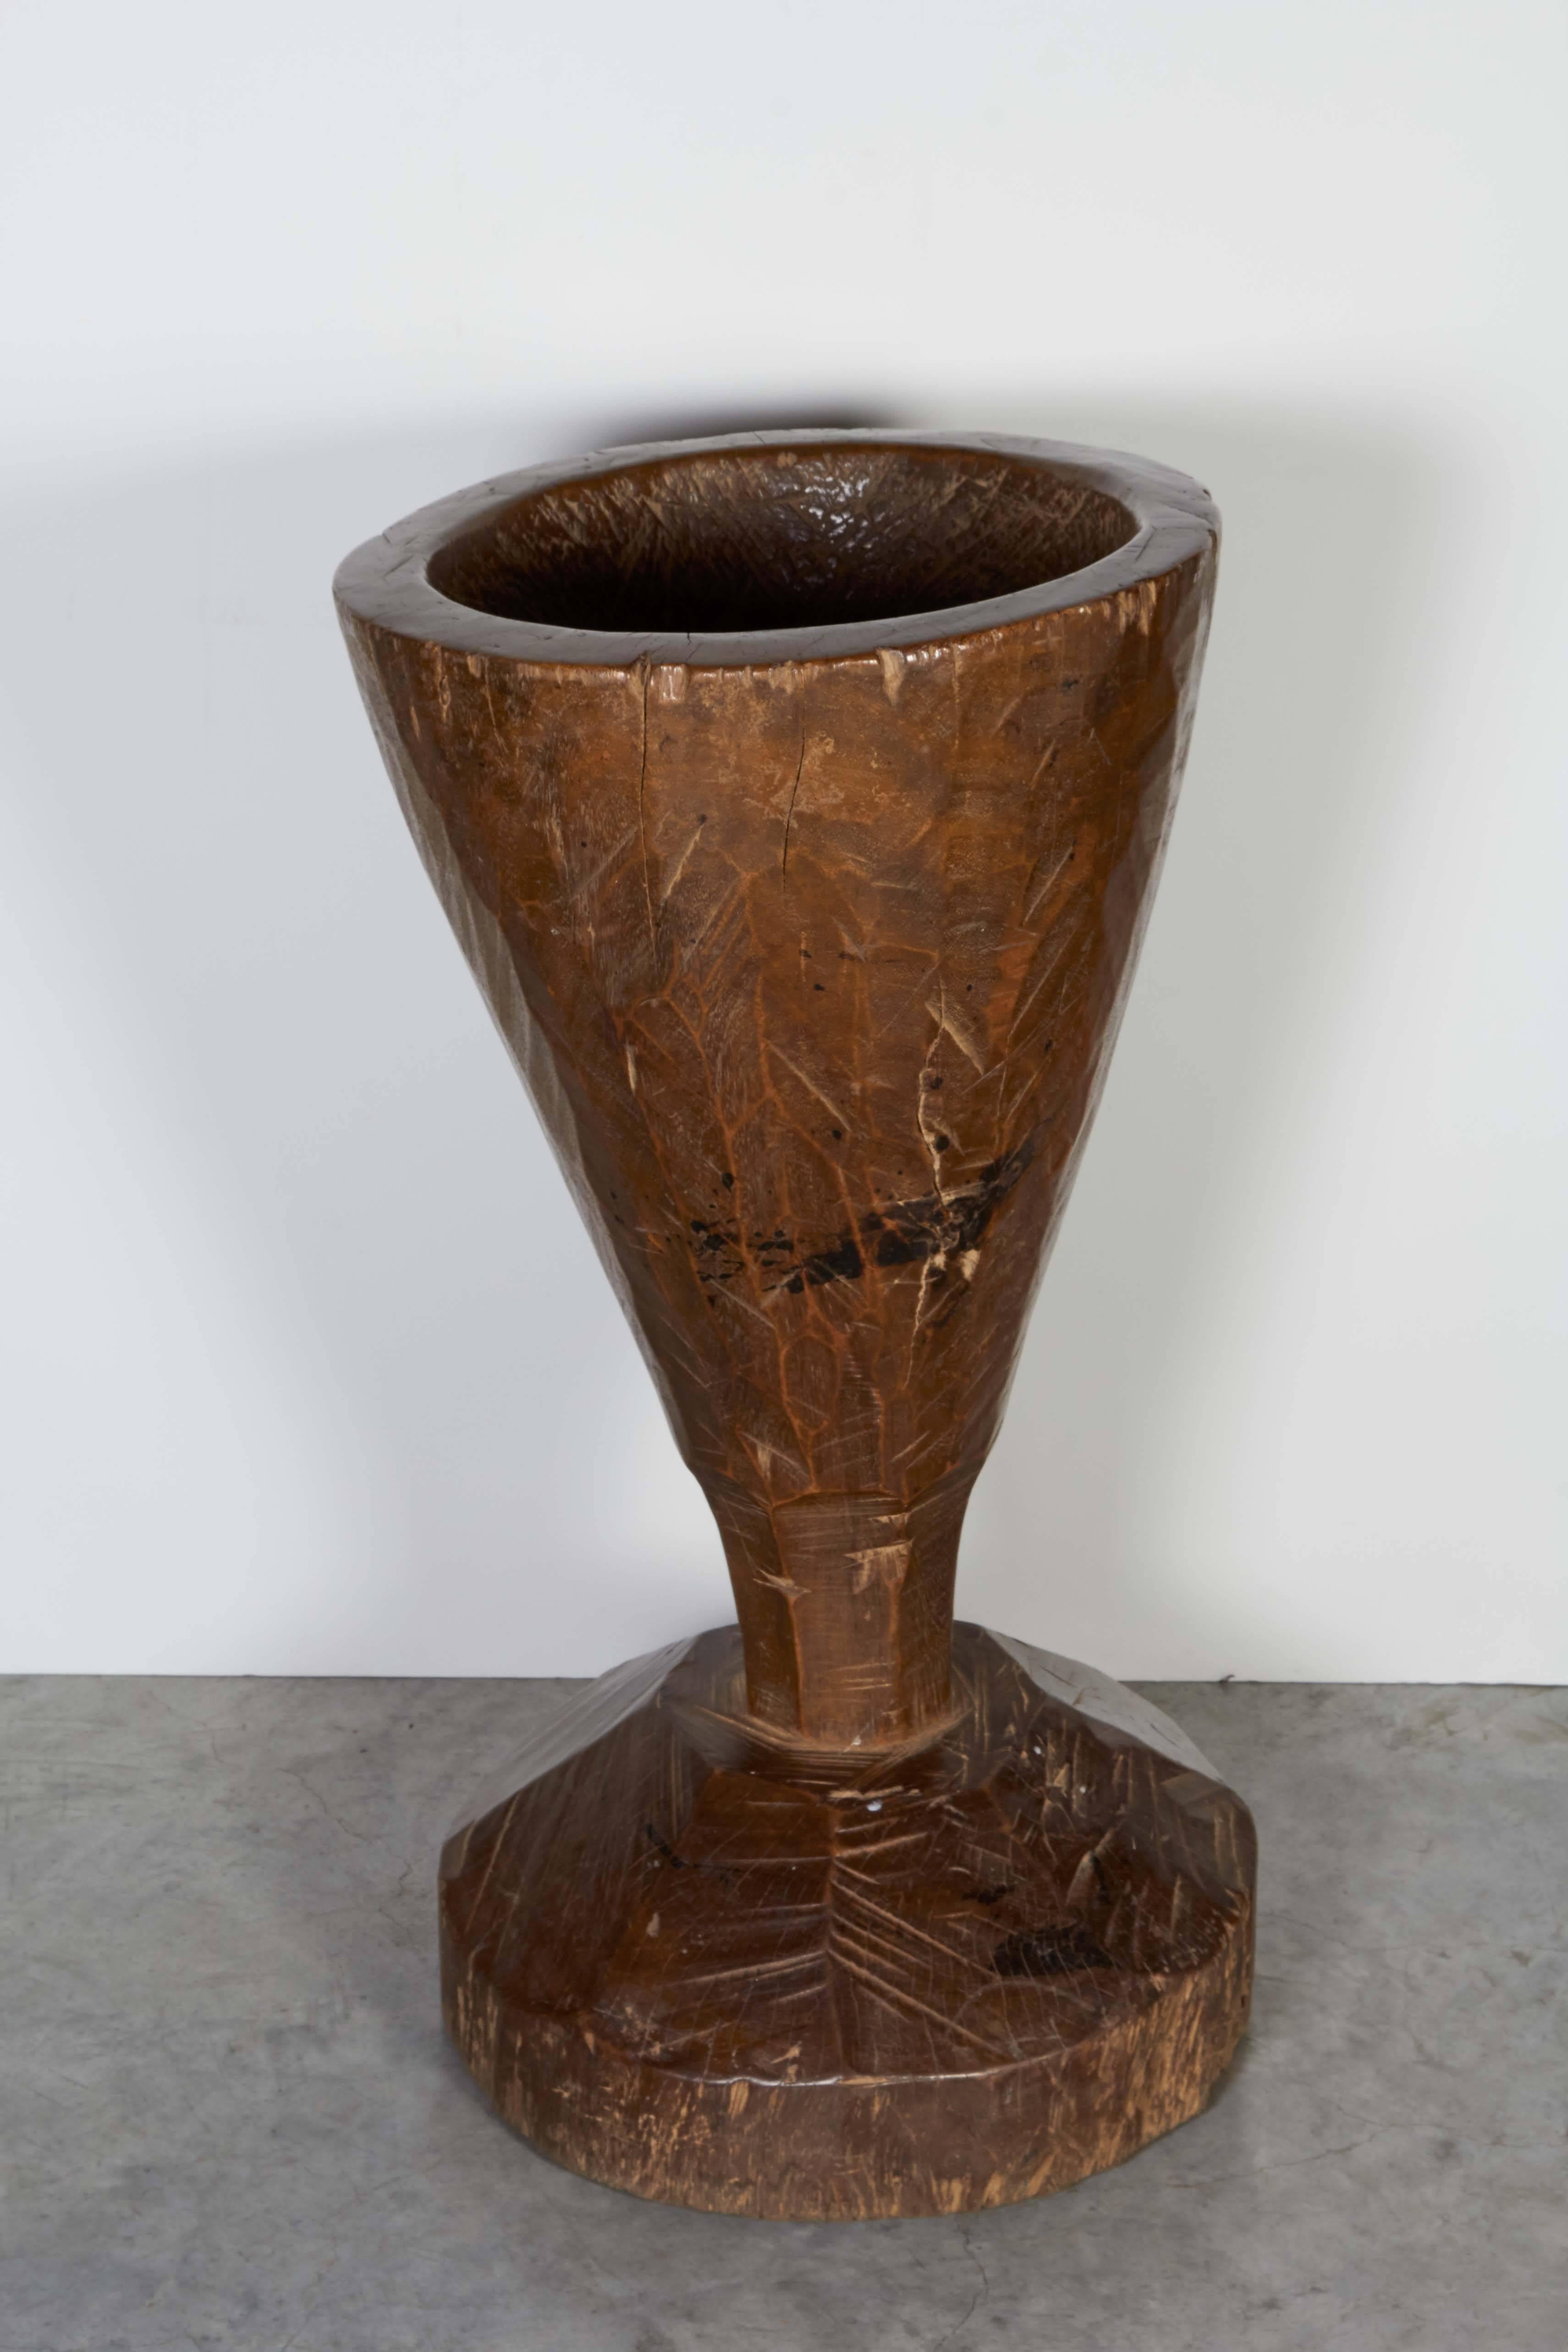 A gracefully shaped tall mortar with beautiful patina, carved out of a single piece of teakwood. From Java, Indonesia, circa 1930s.
M2020.